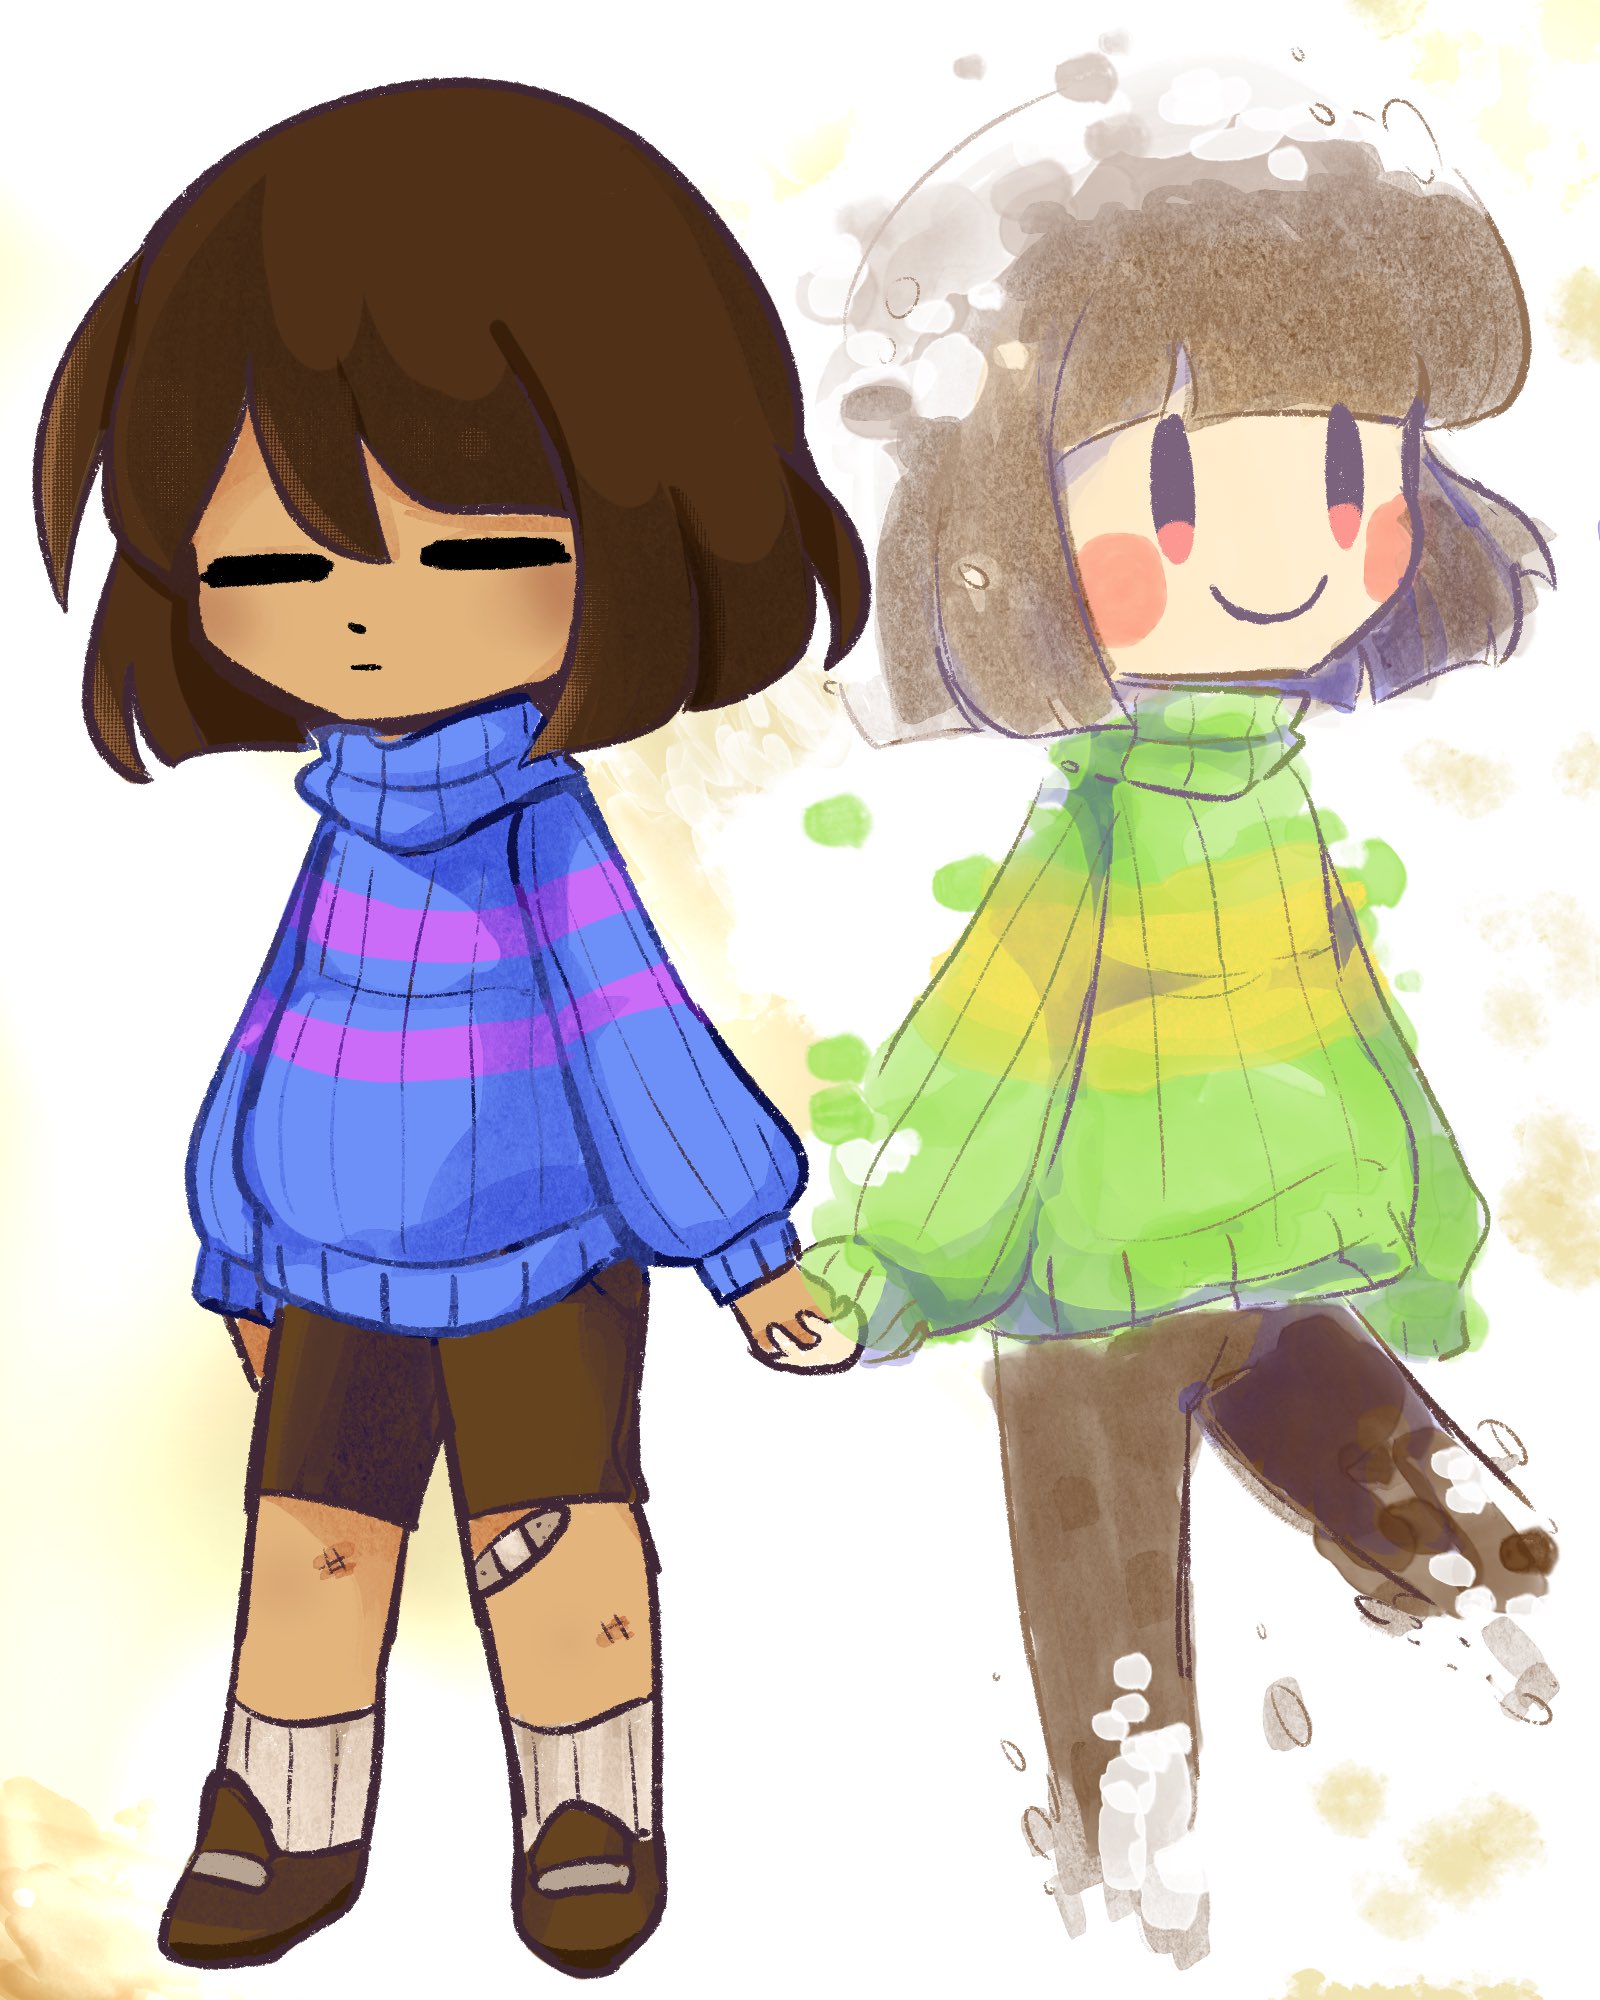 bweepy ✨ on X: frisk and chara #undertale